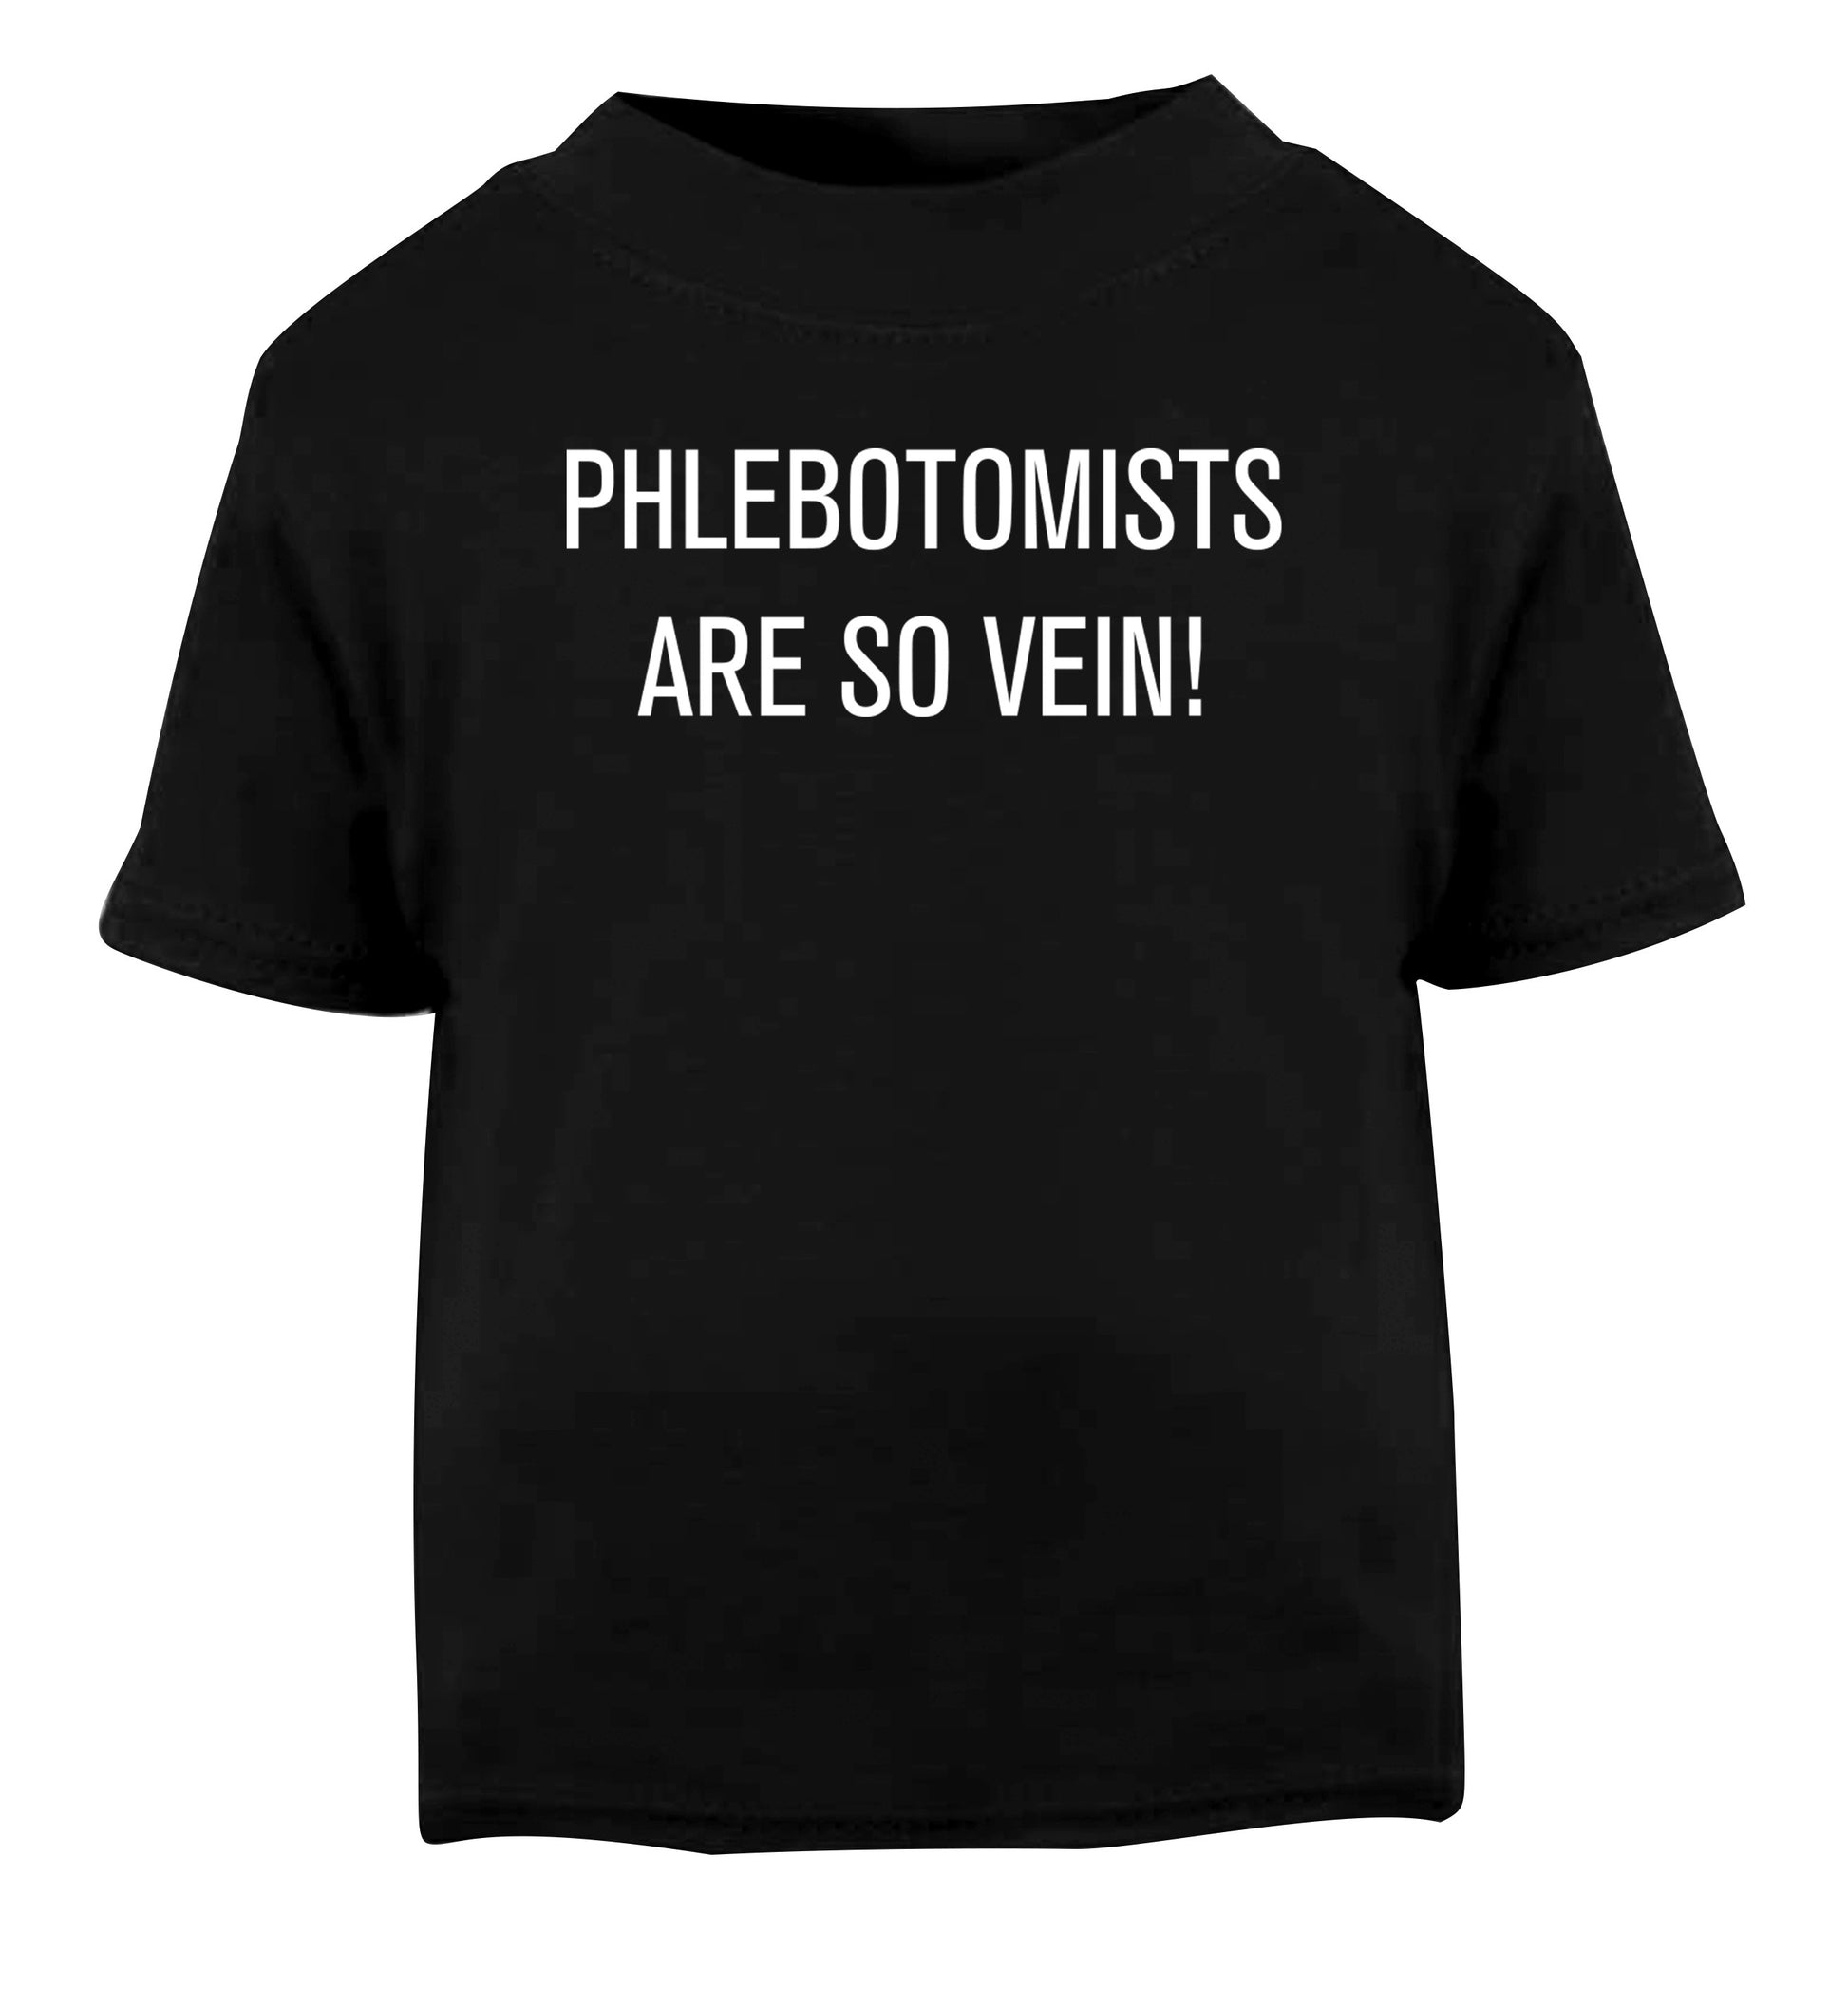 Phlebotomists are so vein! Black Baby Toddler Tshirt 2 years